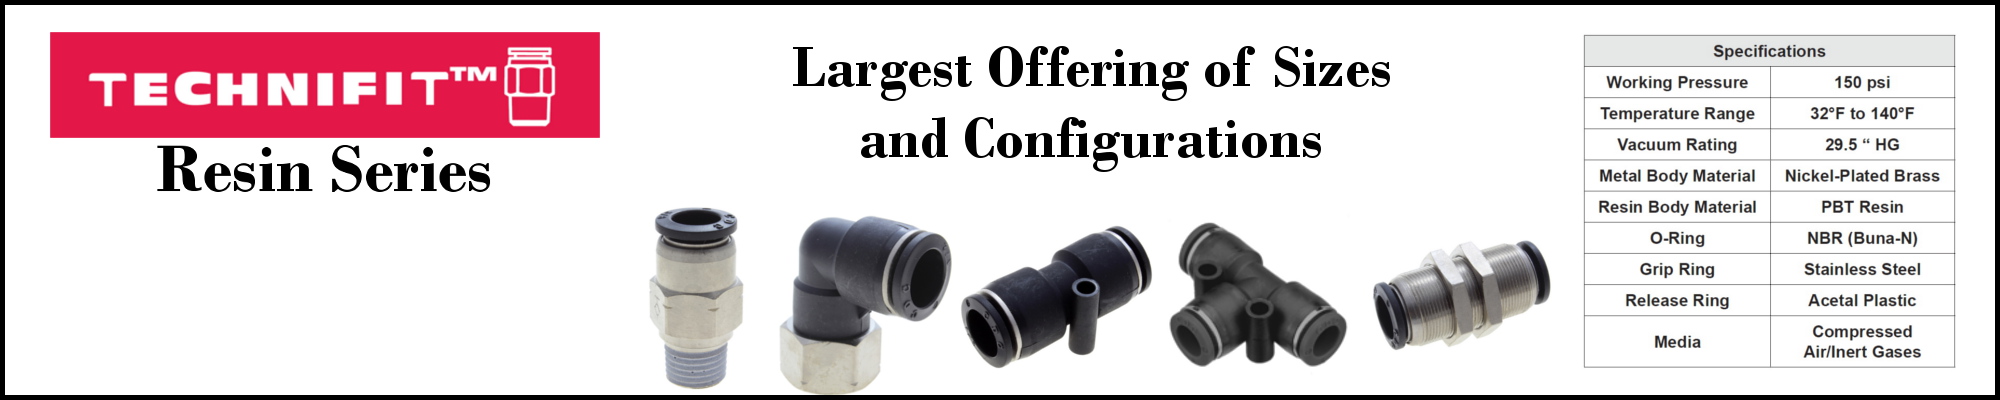 Technifit Resin Series Push-to-Connect Fittings